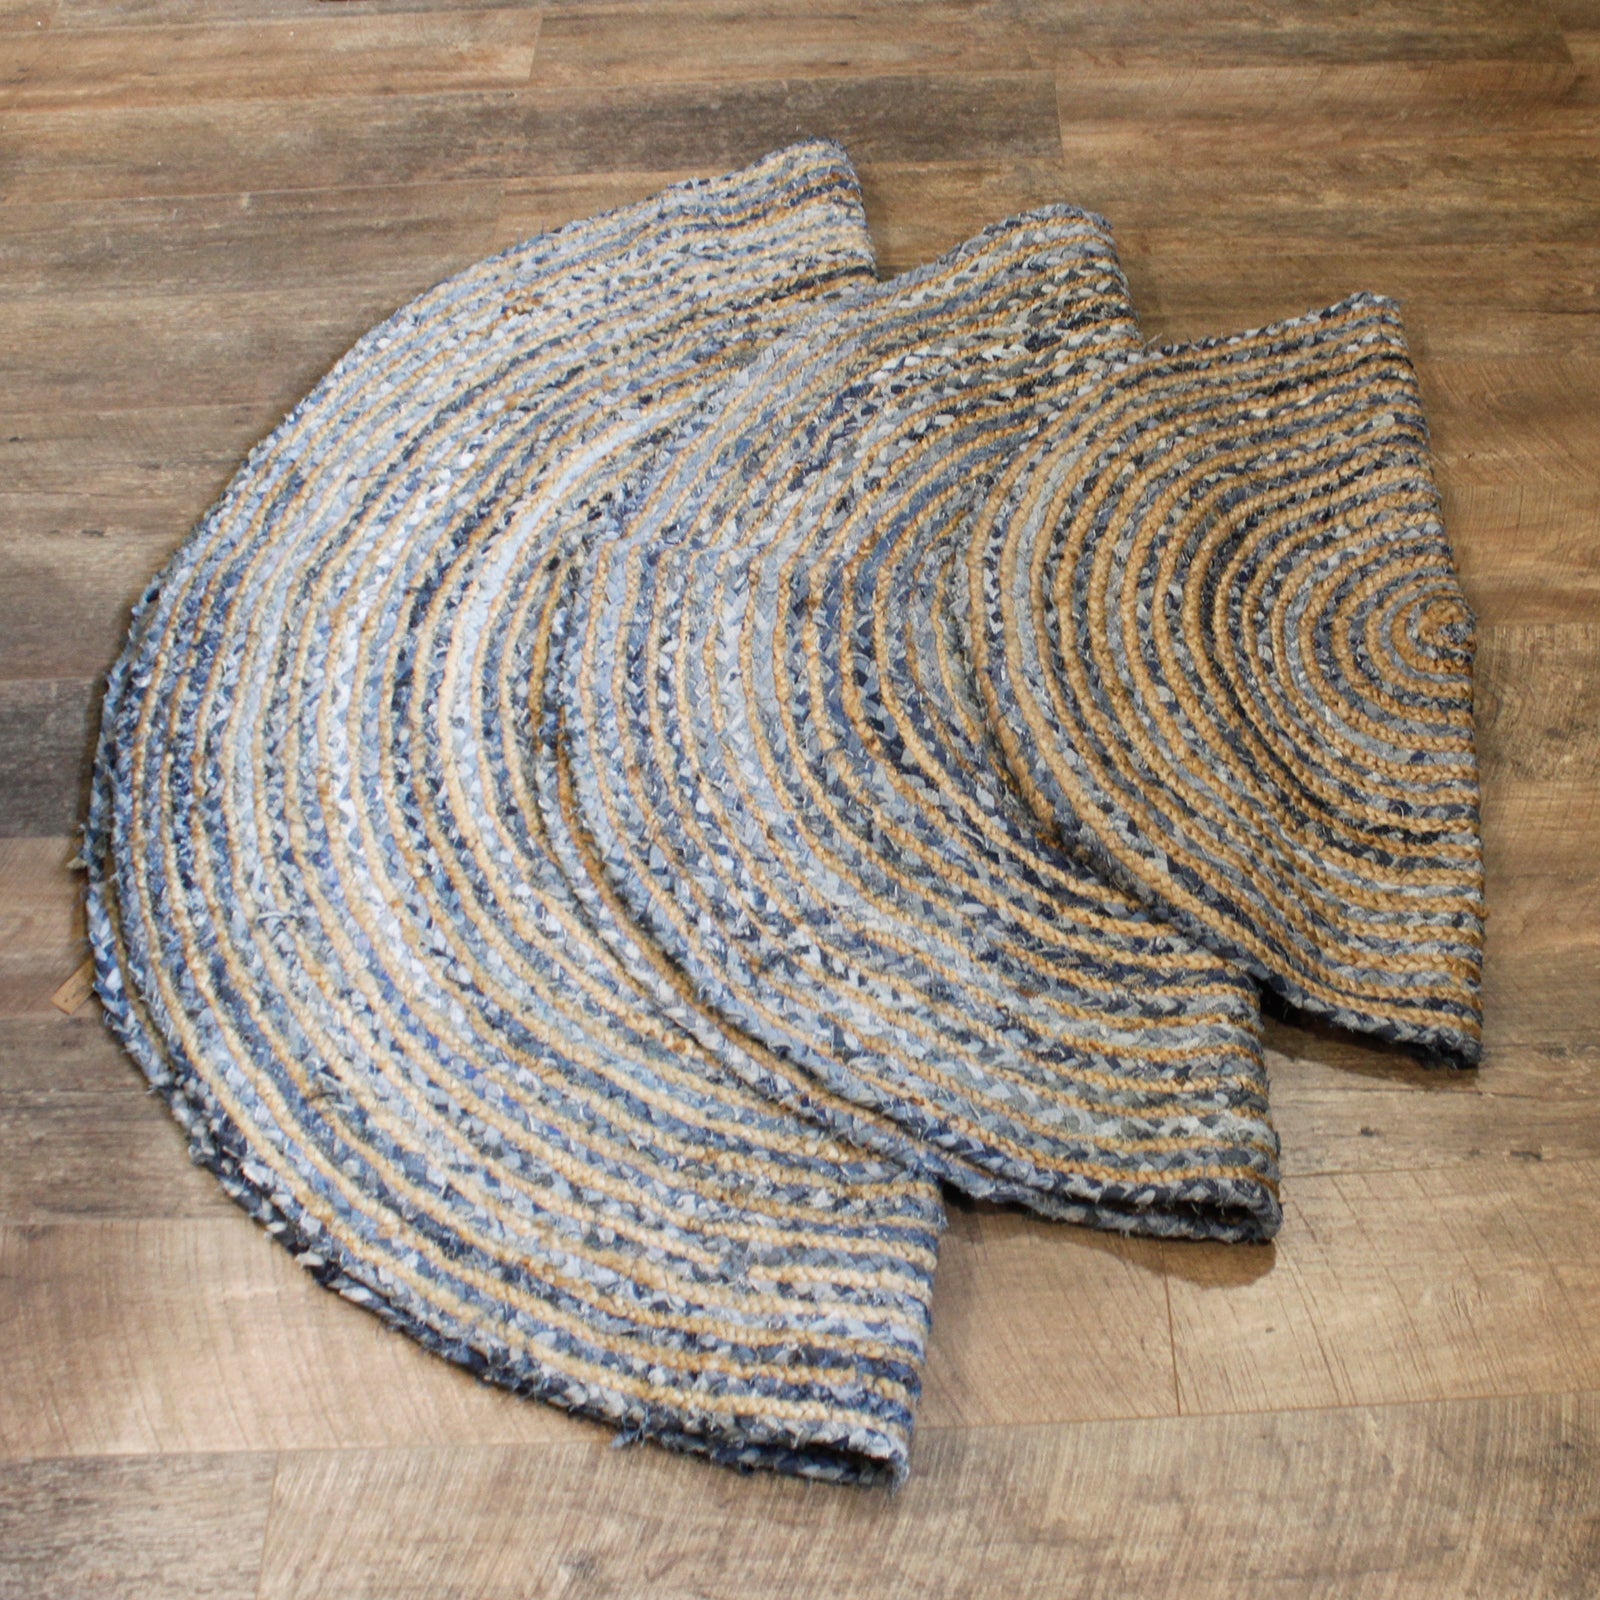 Round Jute and Recycle Denim Rug- 90 cm-Rugs